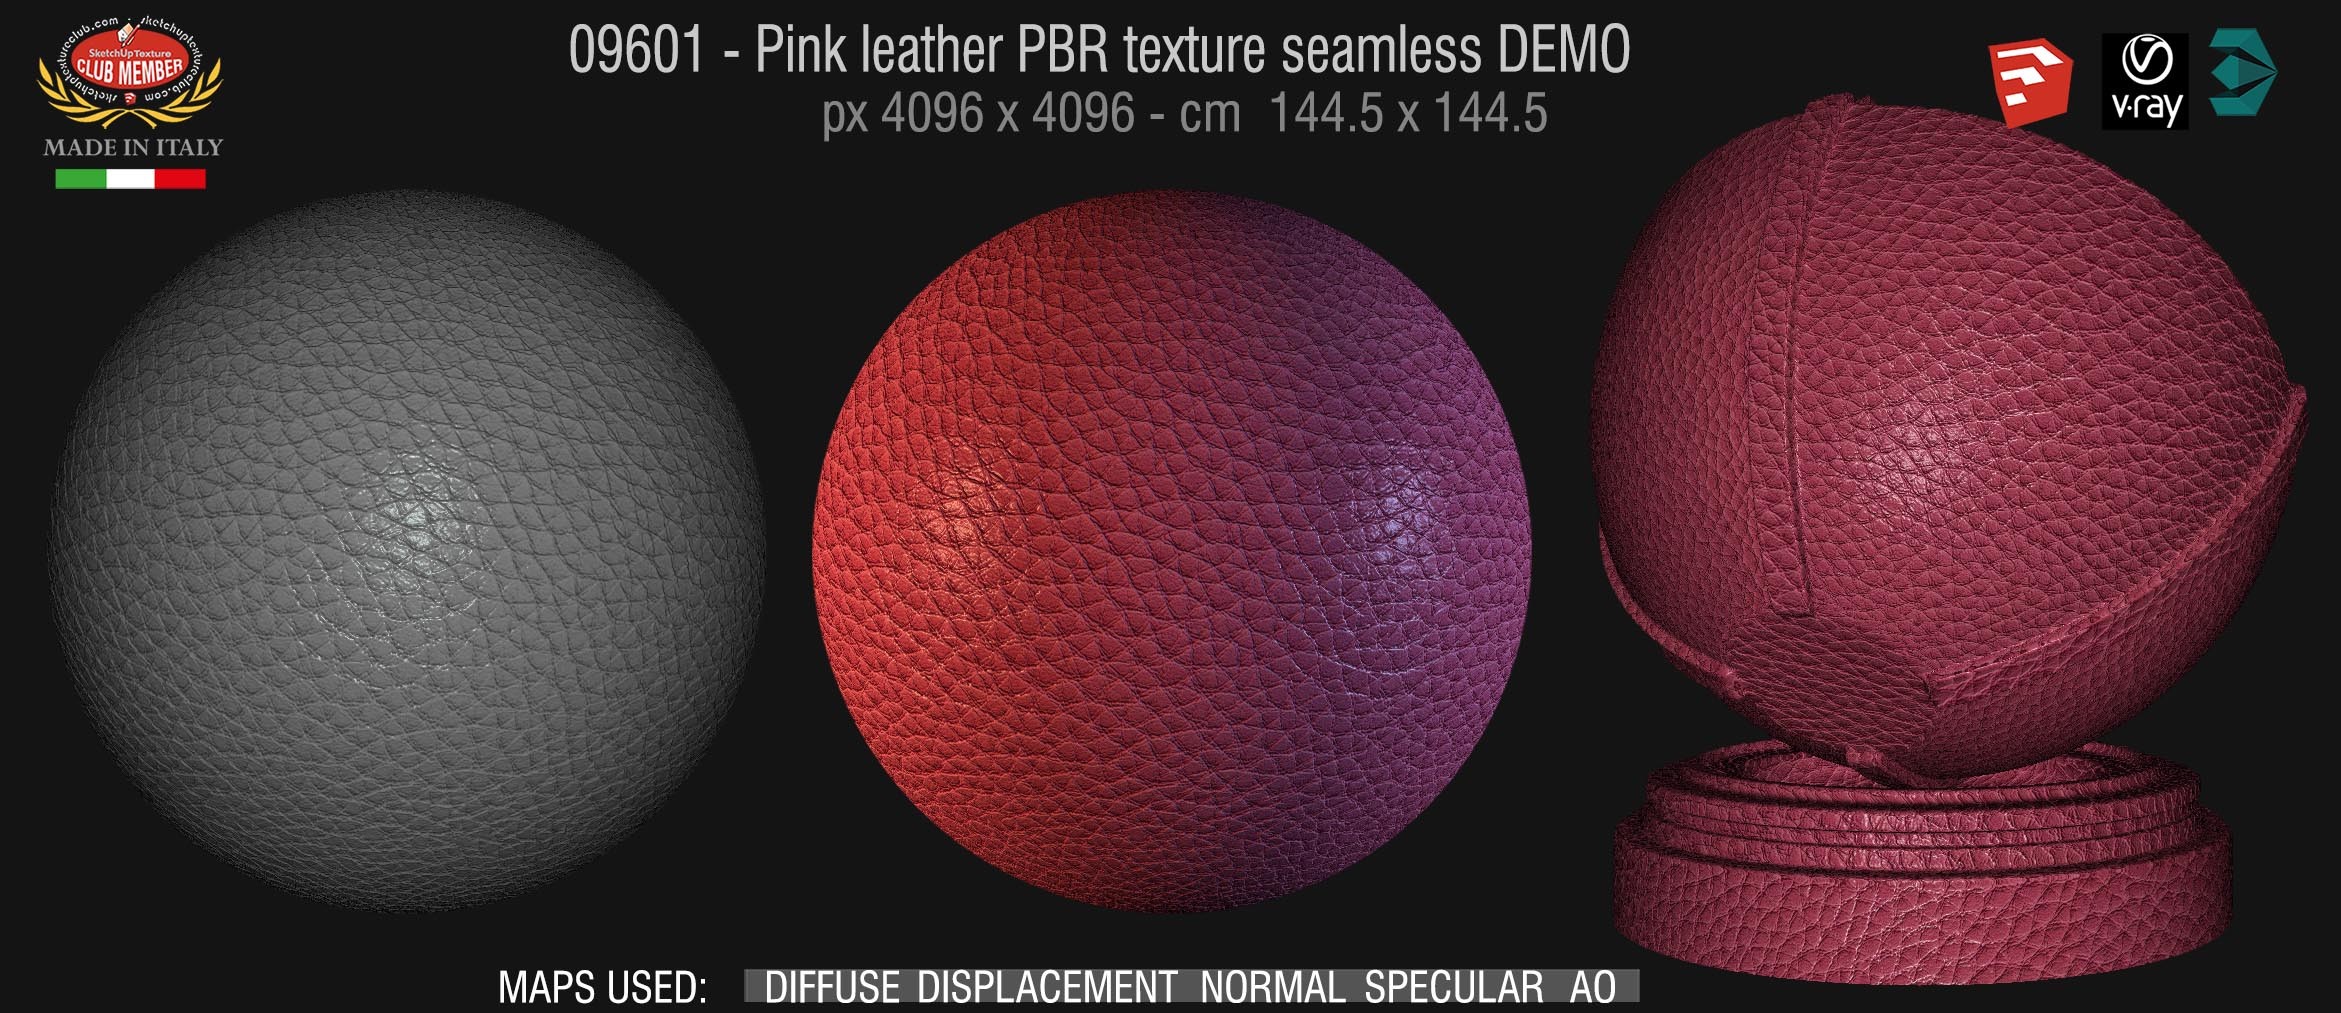 09601 Pink leather PBR texture seamless DEMO